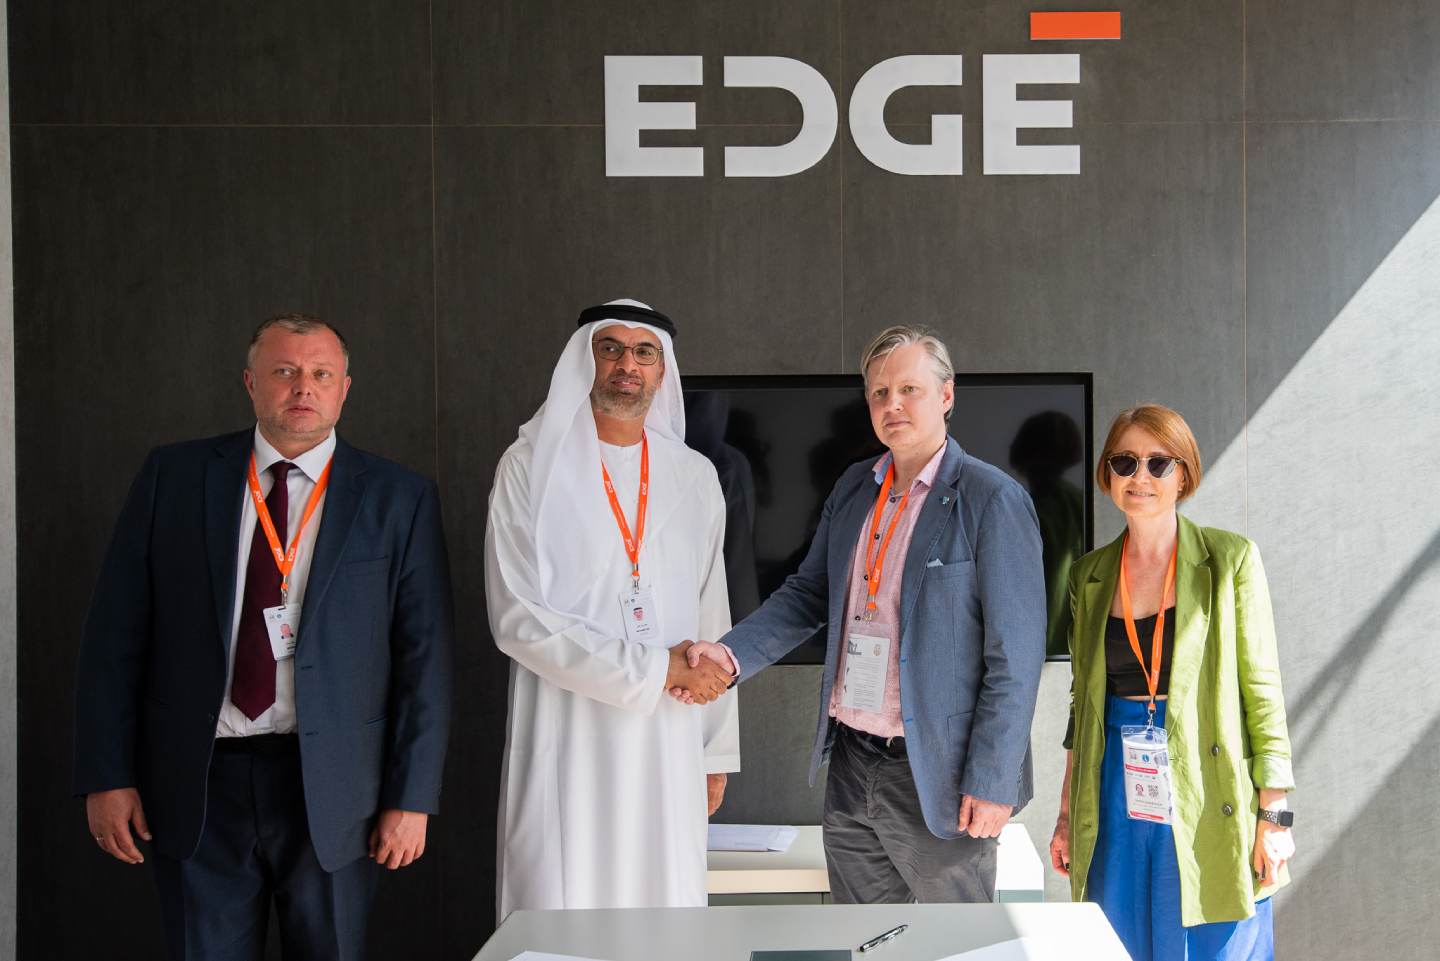 Press Release EDGE to Establish Joint Research and Development Centre for Autonomous Solutions with UAVOS